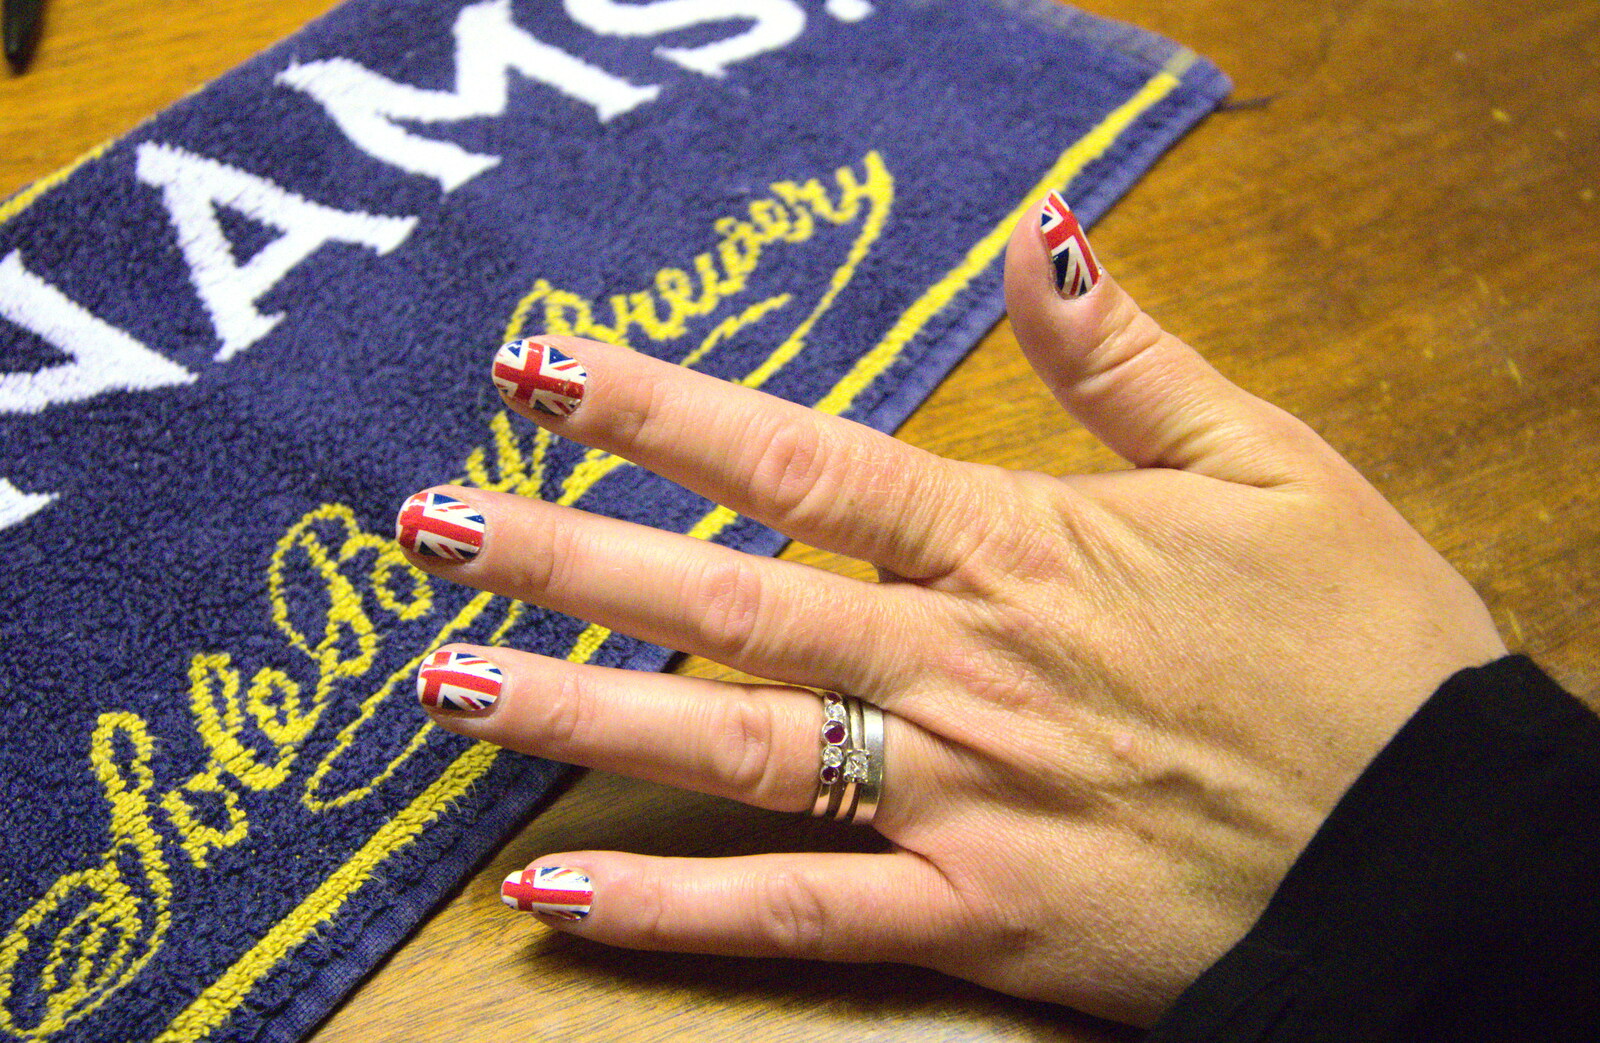 The Queen's Diamond Jubilee Weekend, Eye and Brome, Suffolk - 4th June 2012: Jubilee-styled finger nails